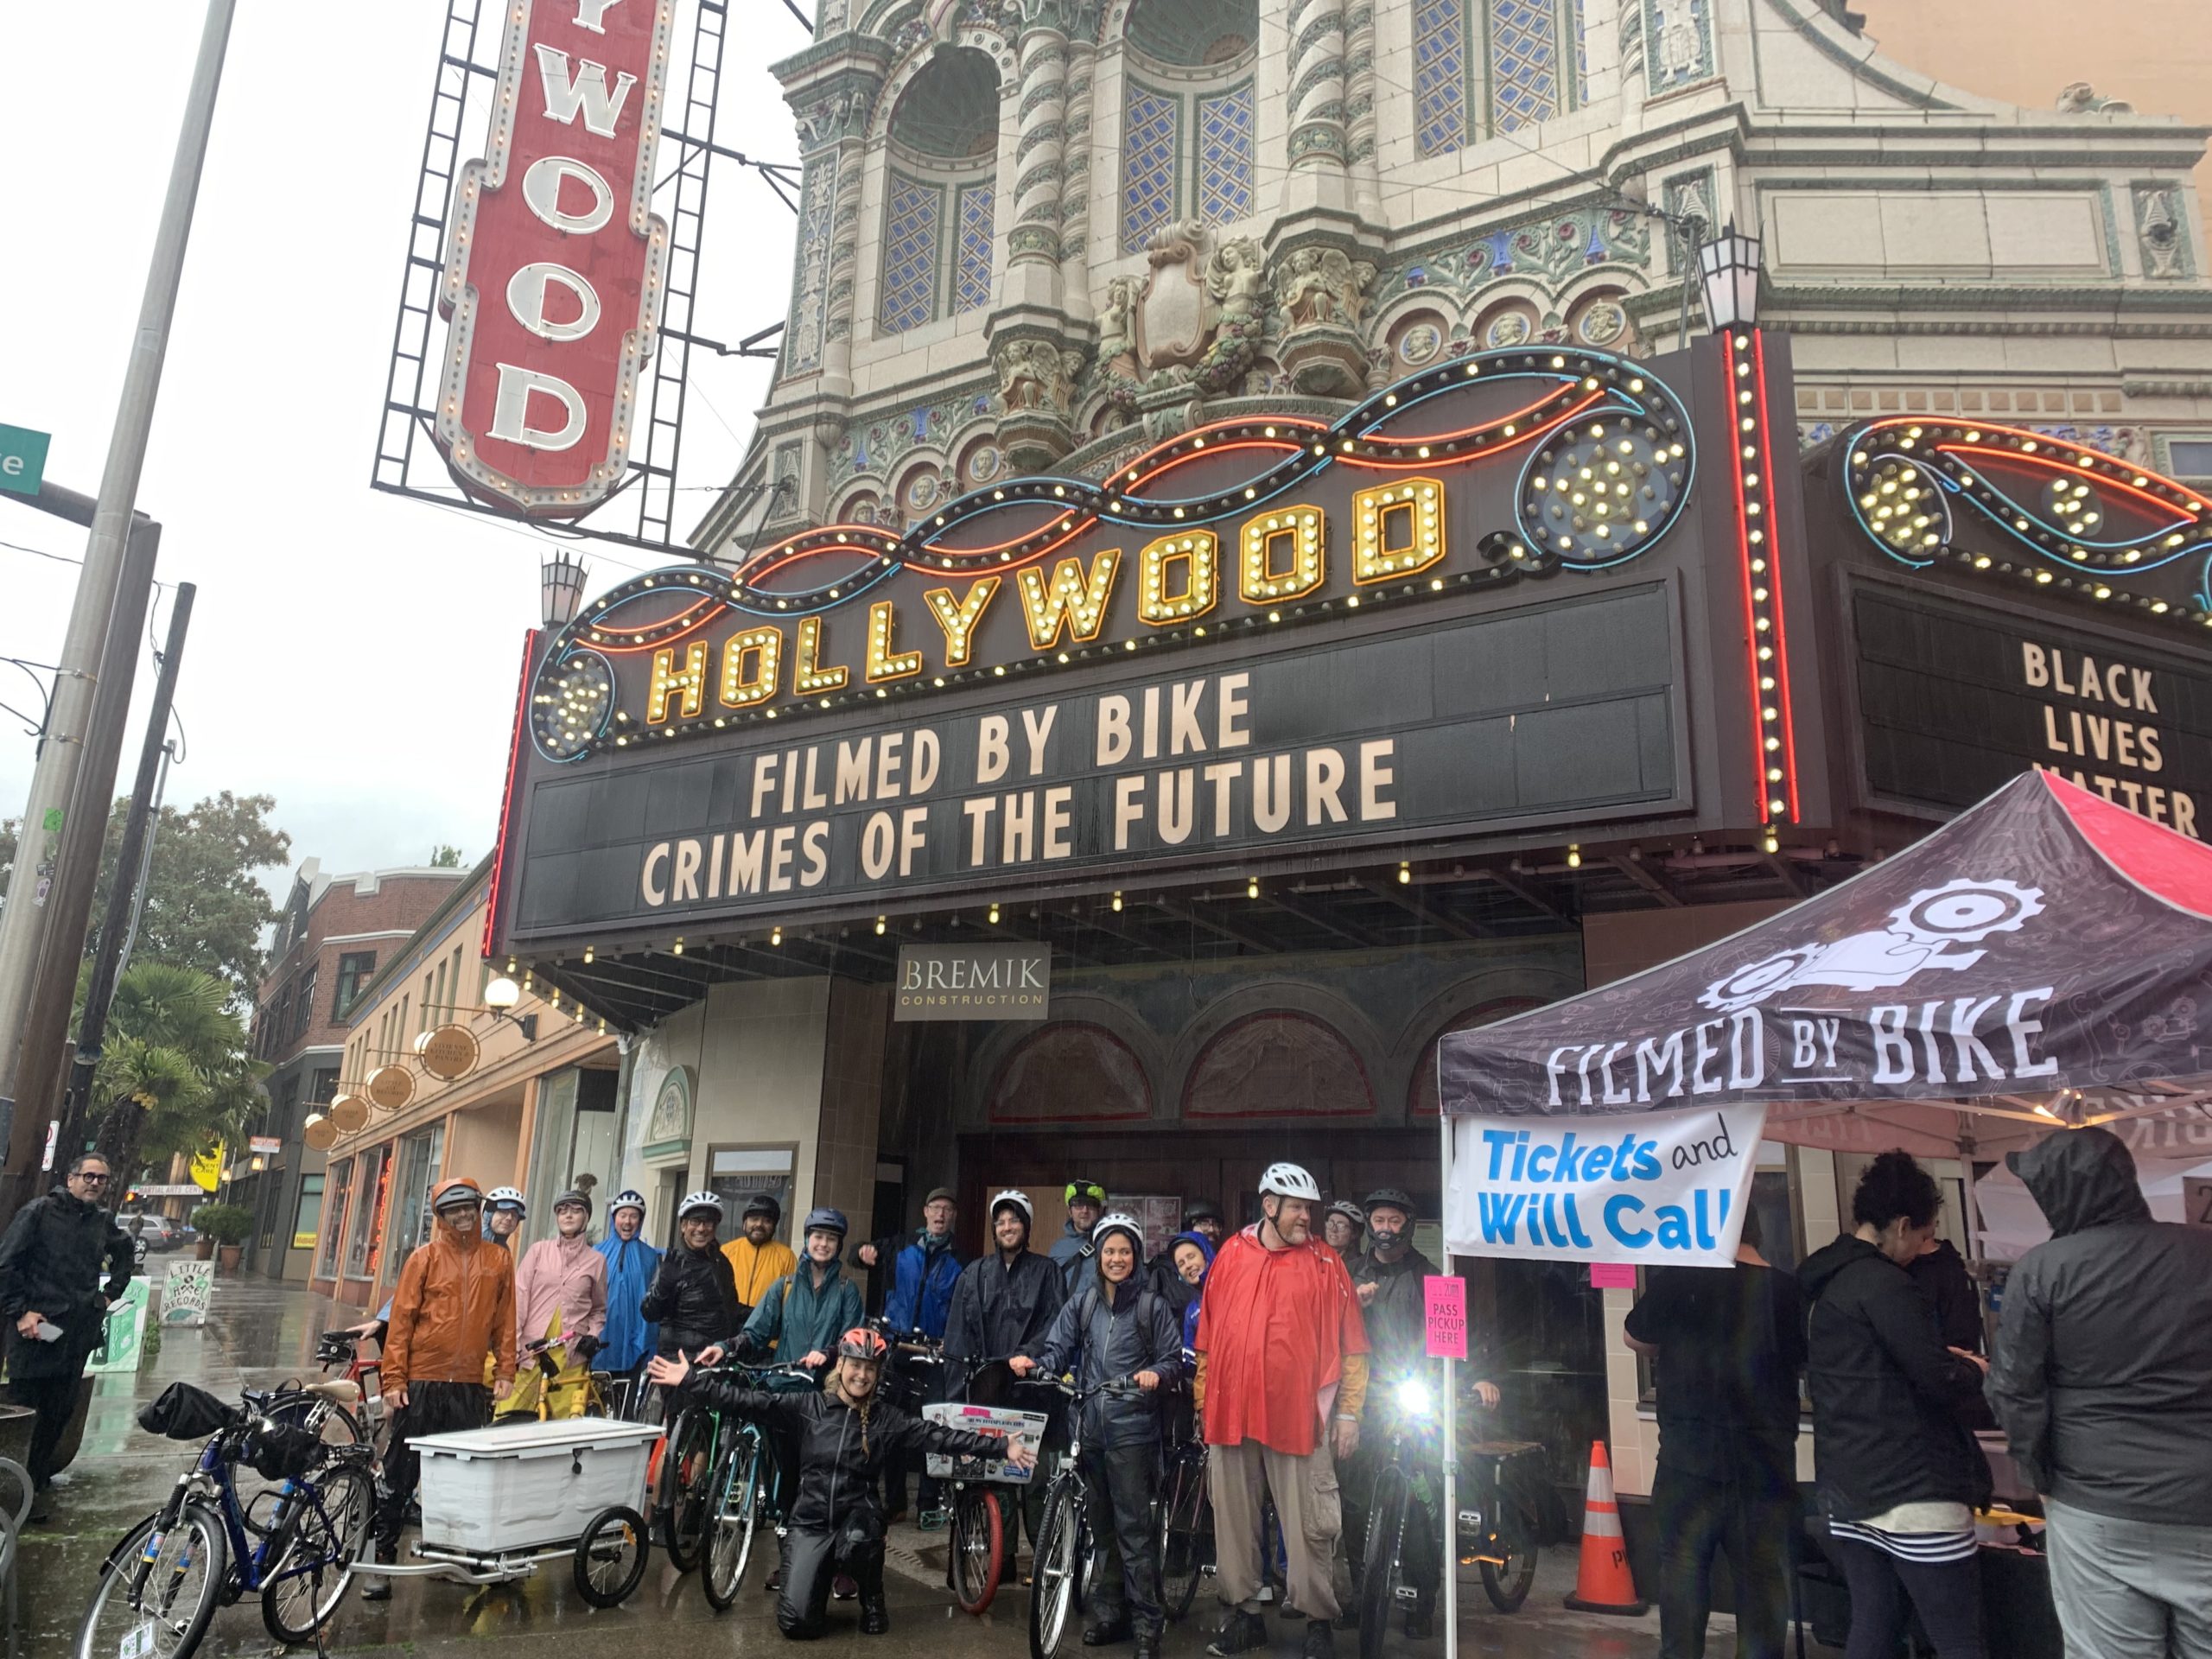 A group of people in rain gear standing under the Hollywood Theatre marquee which reads Filmed by Bike and Crimes of the Future